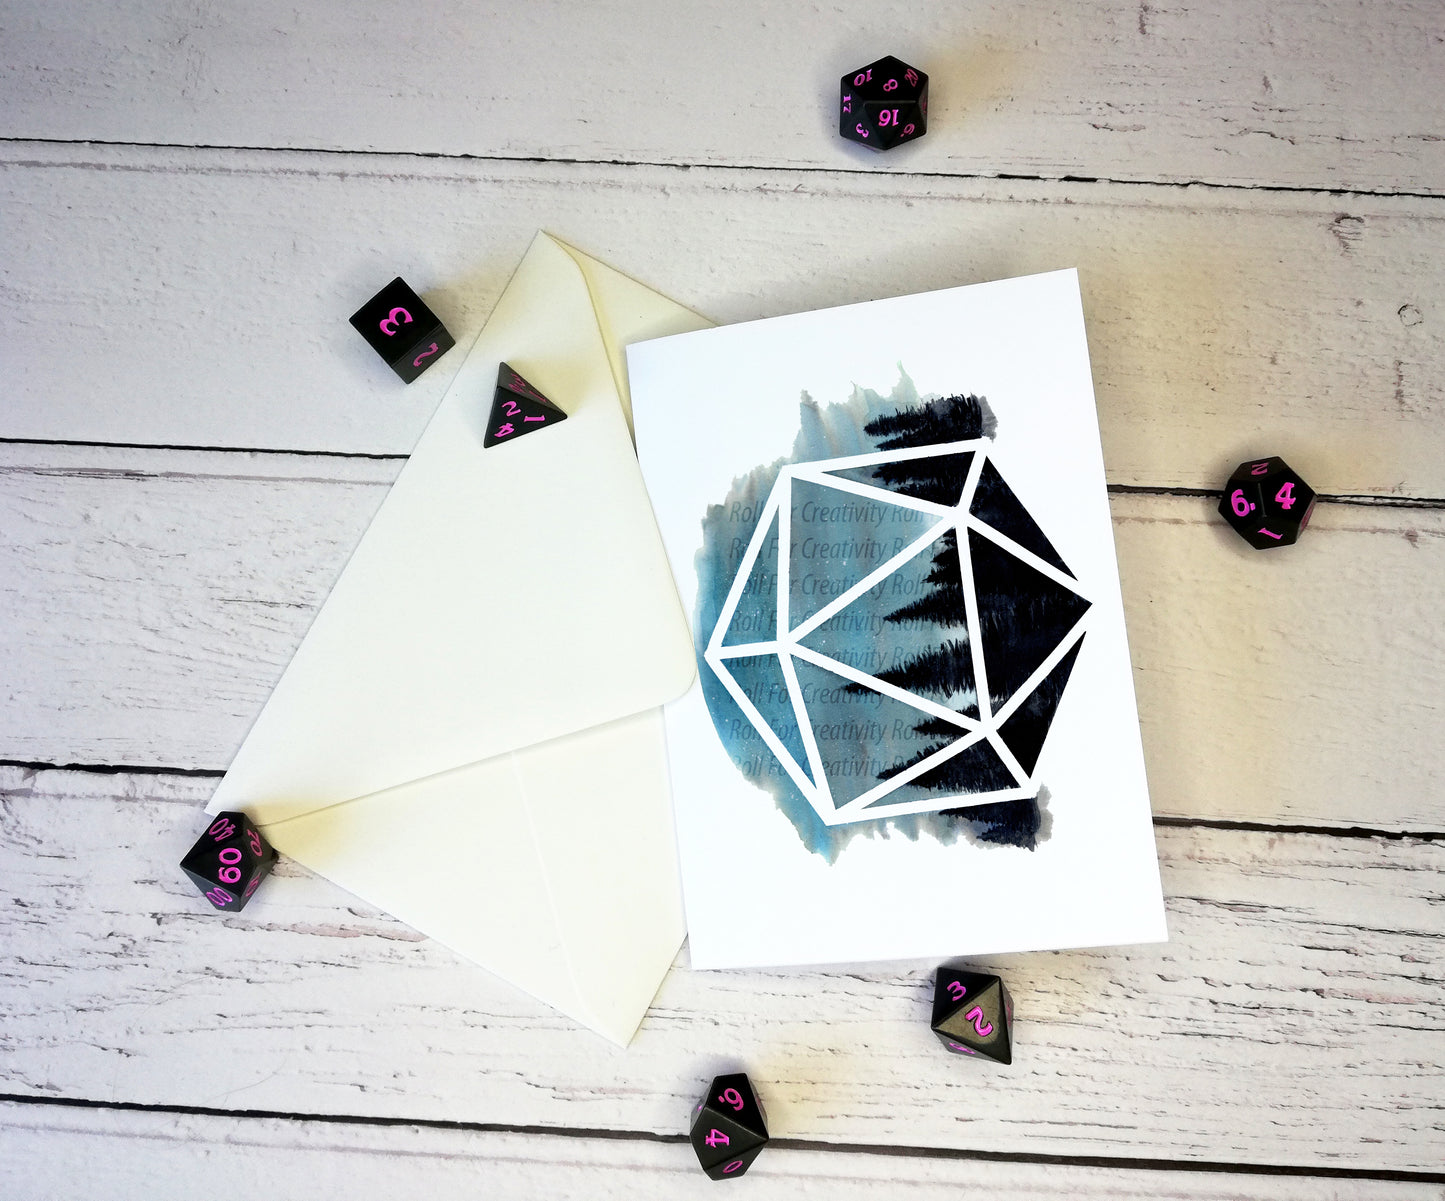 Watercolor D20 A6 Landscape Greetings Card BUNDLE  - Blank Inside for Custom Messages